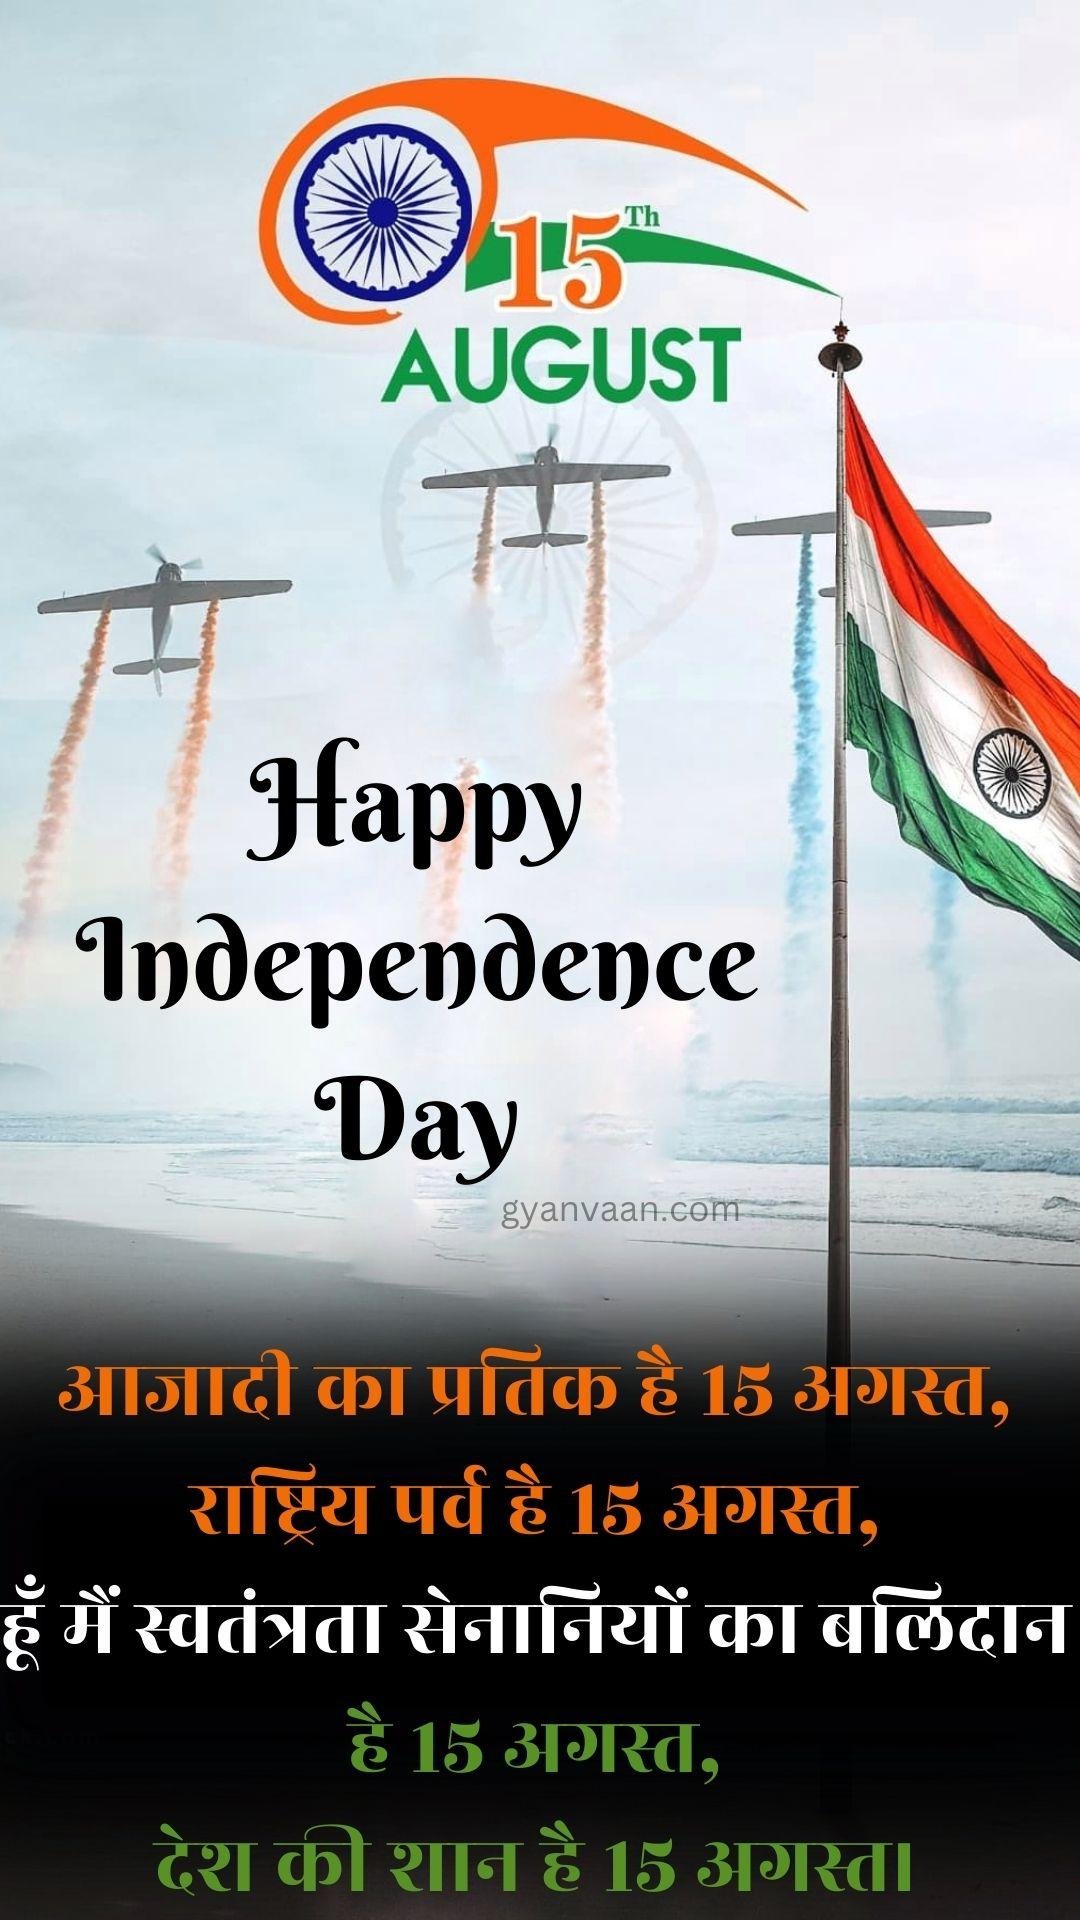 Independence Day Quotes In Hindi With Shayari Slogan Wishes For Whatsapp Status Mobile 5 - Independence Day Quotes In Hindi